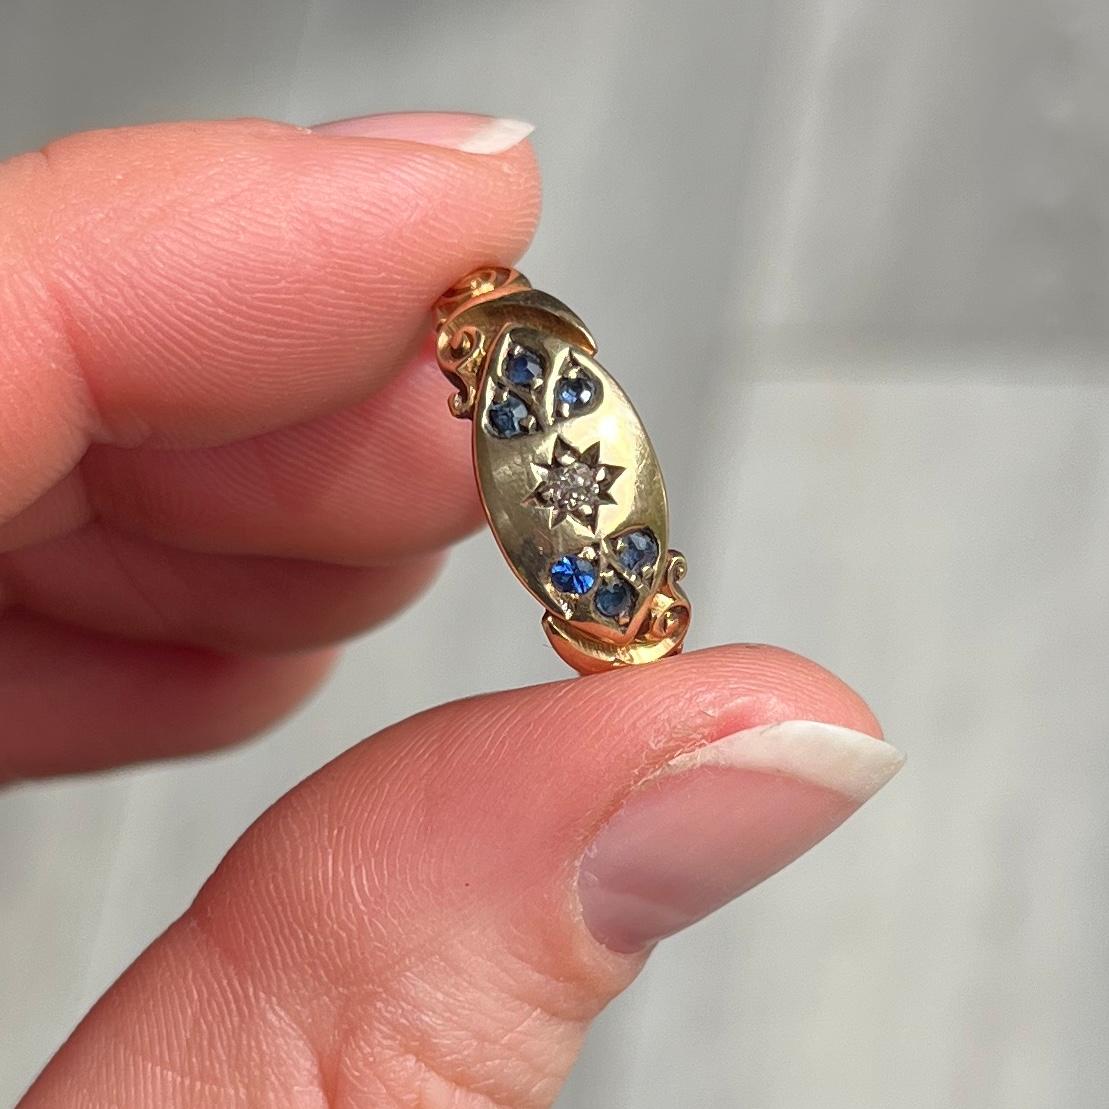 This ring holds a diamond at the centre measuring approx 5pts in a star setting and two trios of diamonds measuring 9pts per trio. Fully hallmarked Birmingham 1901.

Ring Size: O or 7 1/4
Band Width: 8mm

Weight: 3.4g